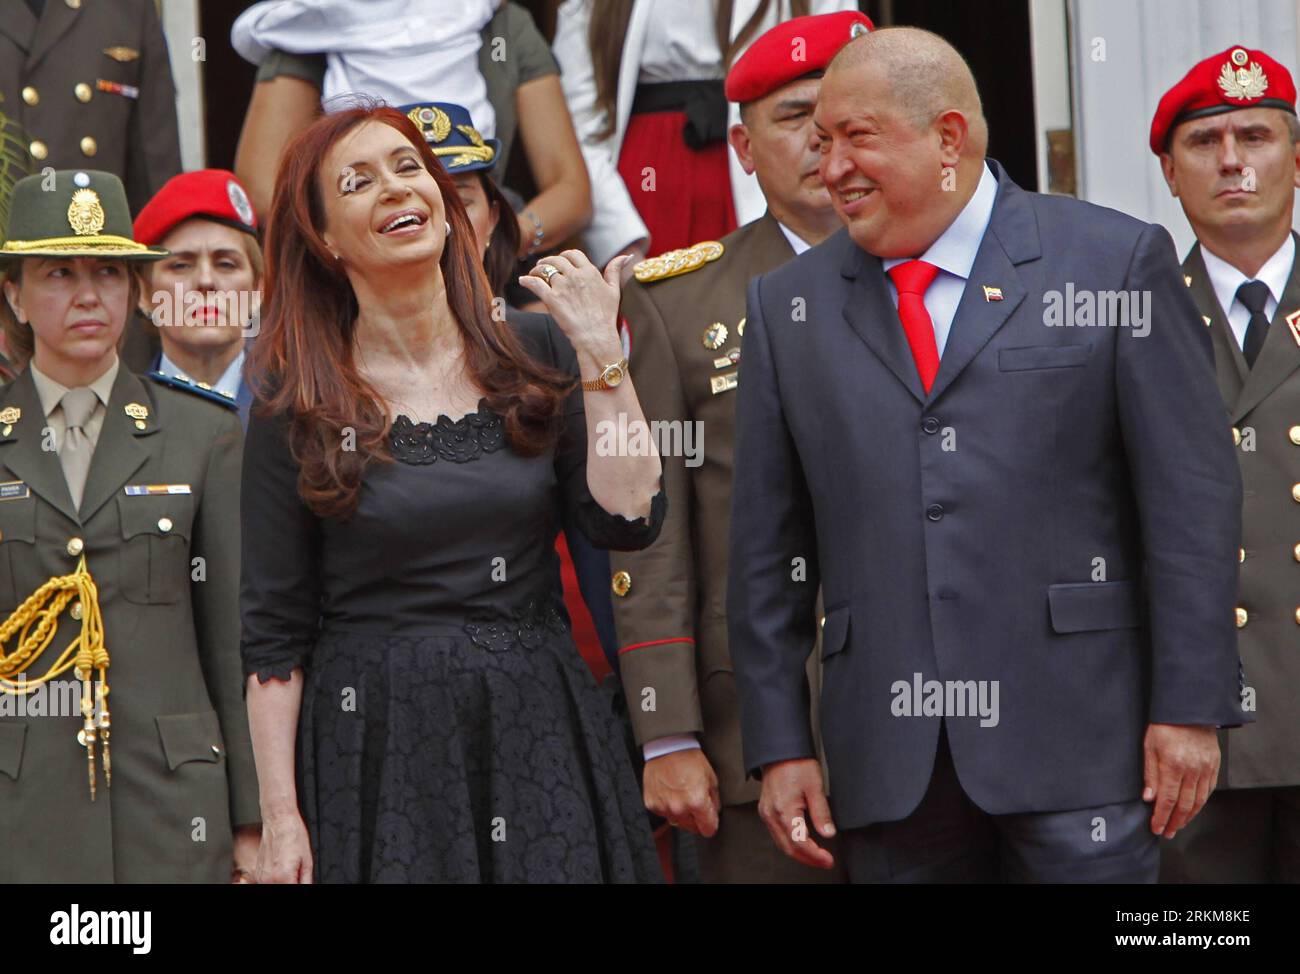 (111202) -- CARACAS, Dec. 2, 2011 (Xinhua) -- Venezuelan President Hugo Chavez (R, front) talks with his Argentine counterpart Cristina Fernandez de Kirchner (L, front) before a bilateral meeting at the Miraflores Presidential Palace, in Caracas, capital of Venezuela, on Dec. 1, 2011. (Xinhua/Juan Carlos Hernandez) (py)(dtf) VENEZUELA-CARACAS-ARGENTINA-REUNION PUBLICATIONxNOTxINxCHN   Caracas DEC 2 2011 XINHUA Venezuelan President Hugo Chavez r Front Talks With His Argentine Part Cristina Fernandez de Kirchner l Front Before a bilaterally Meeting AT The Miraflores Presidential Palace in Caraca Stock Photo